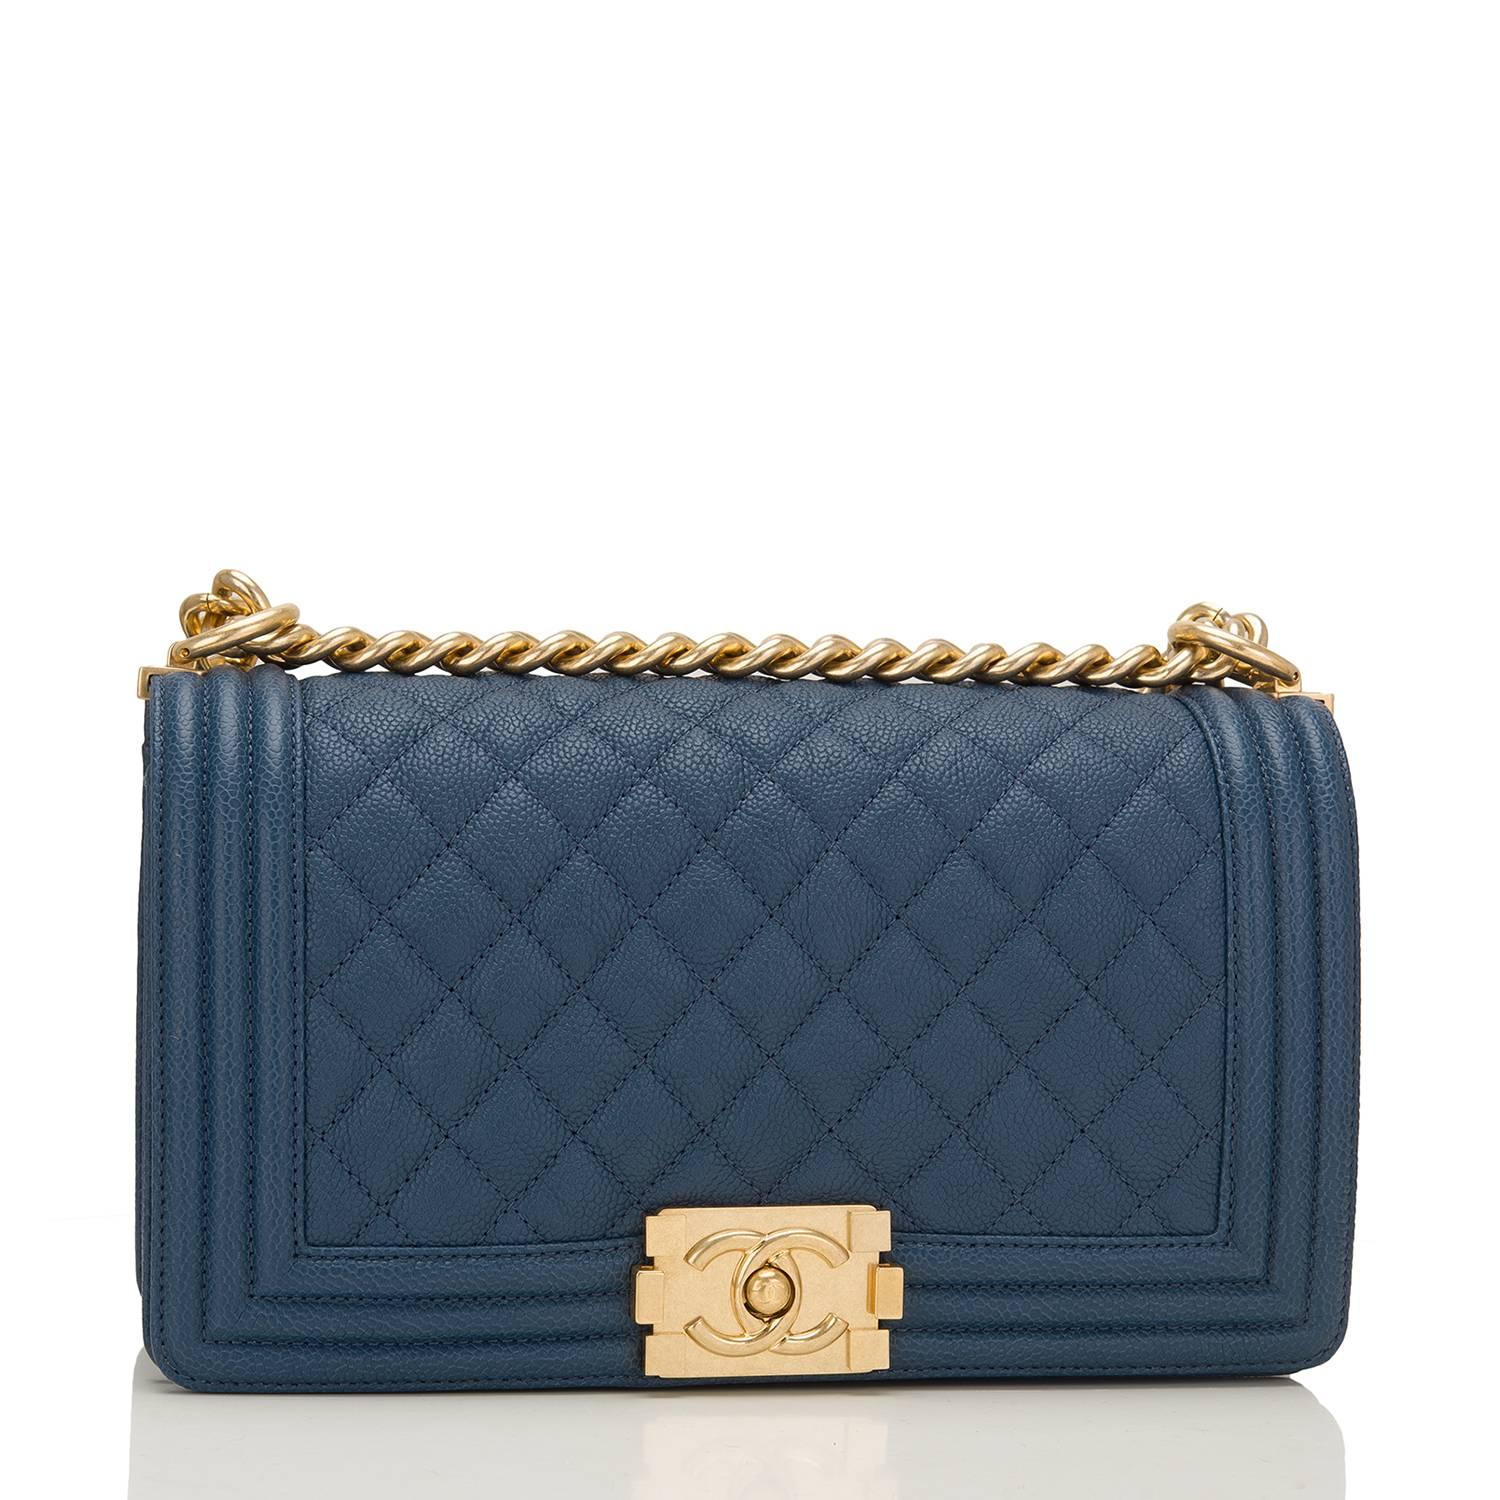 Chanel Old Medium Boy bag of dark blue quilted caviar leather and antique gold hardware.

This Chanel bag is in the classic Boy style with a full front flap with the Boy signature CC push lock closure, smooth leather trim and antique gold chain